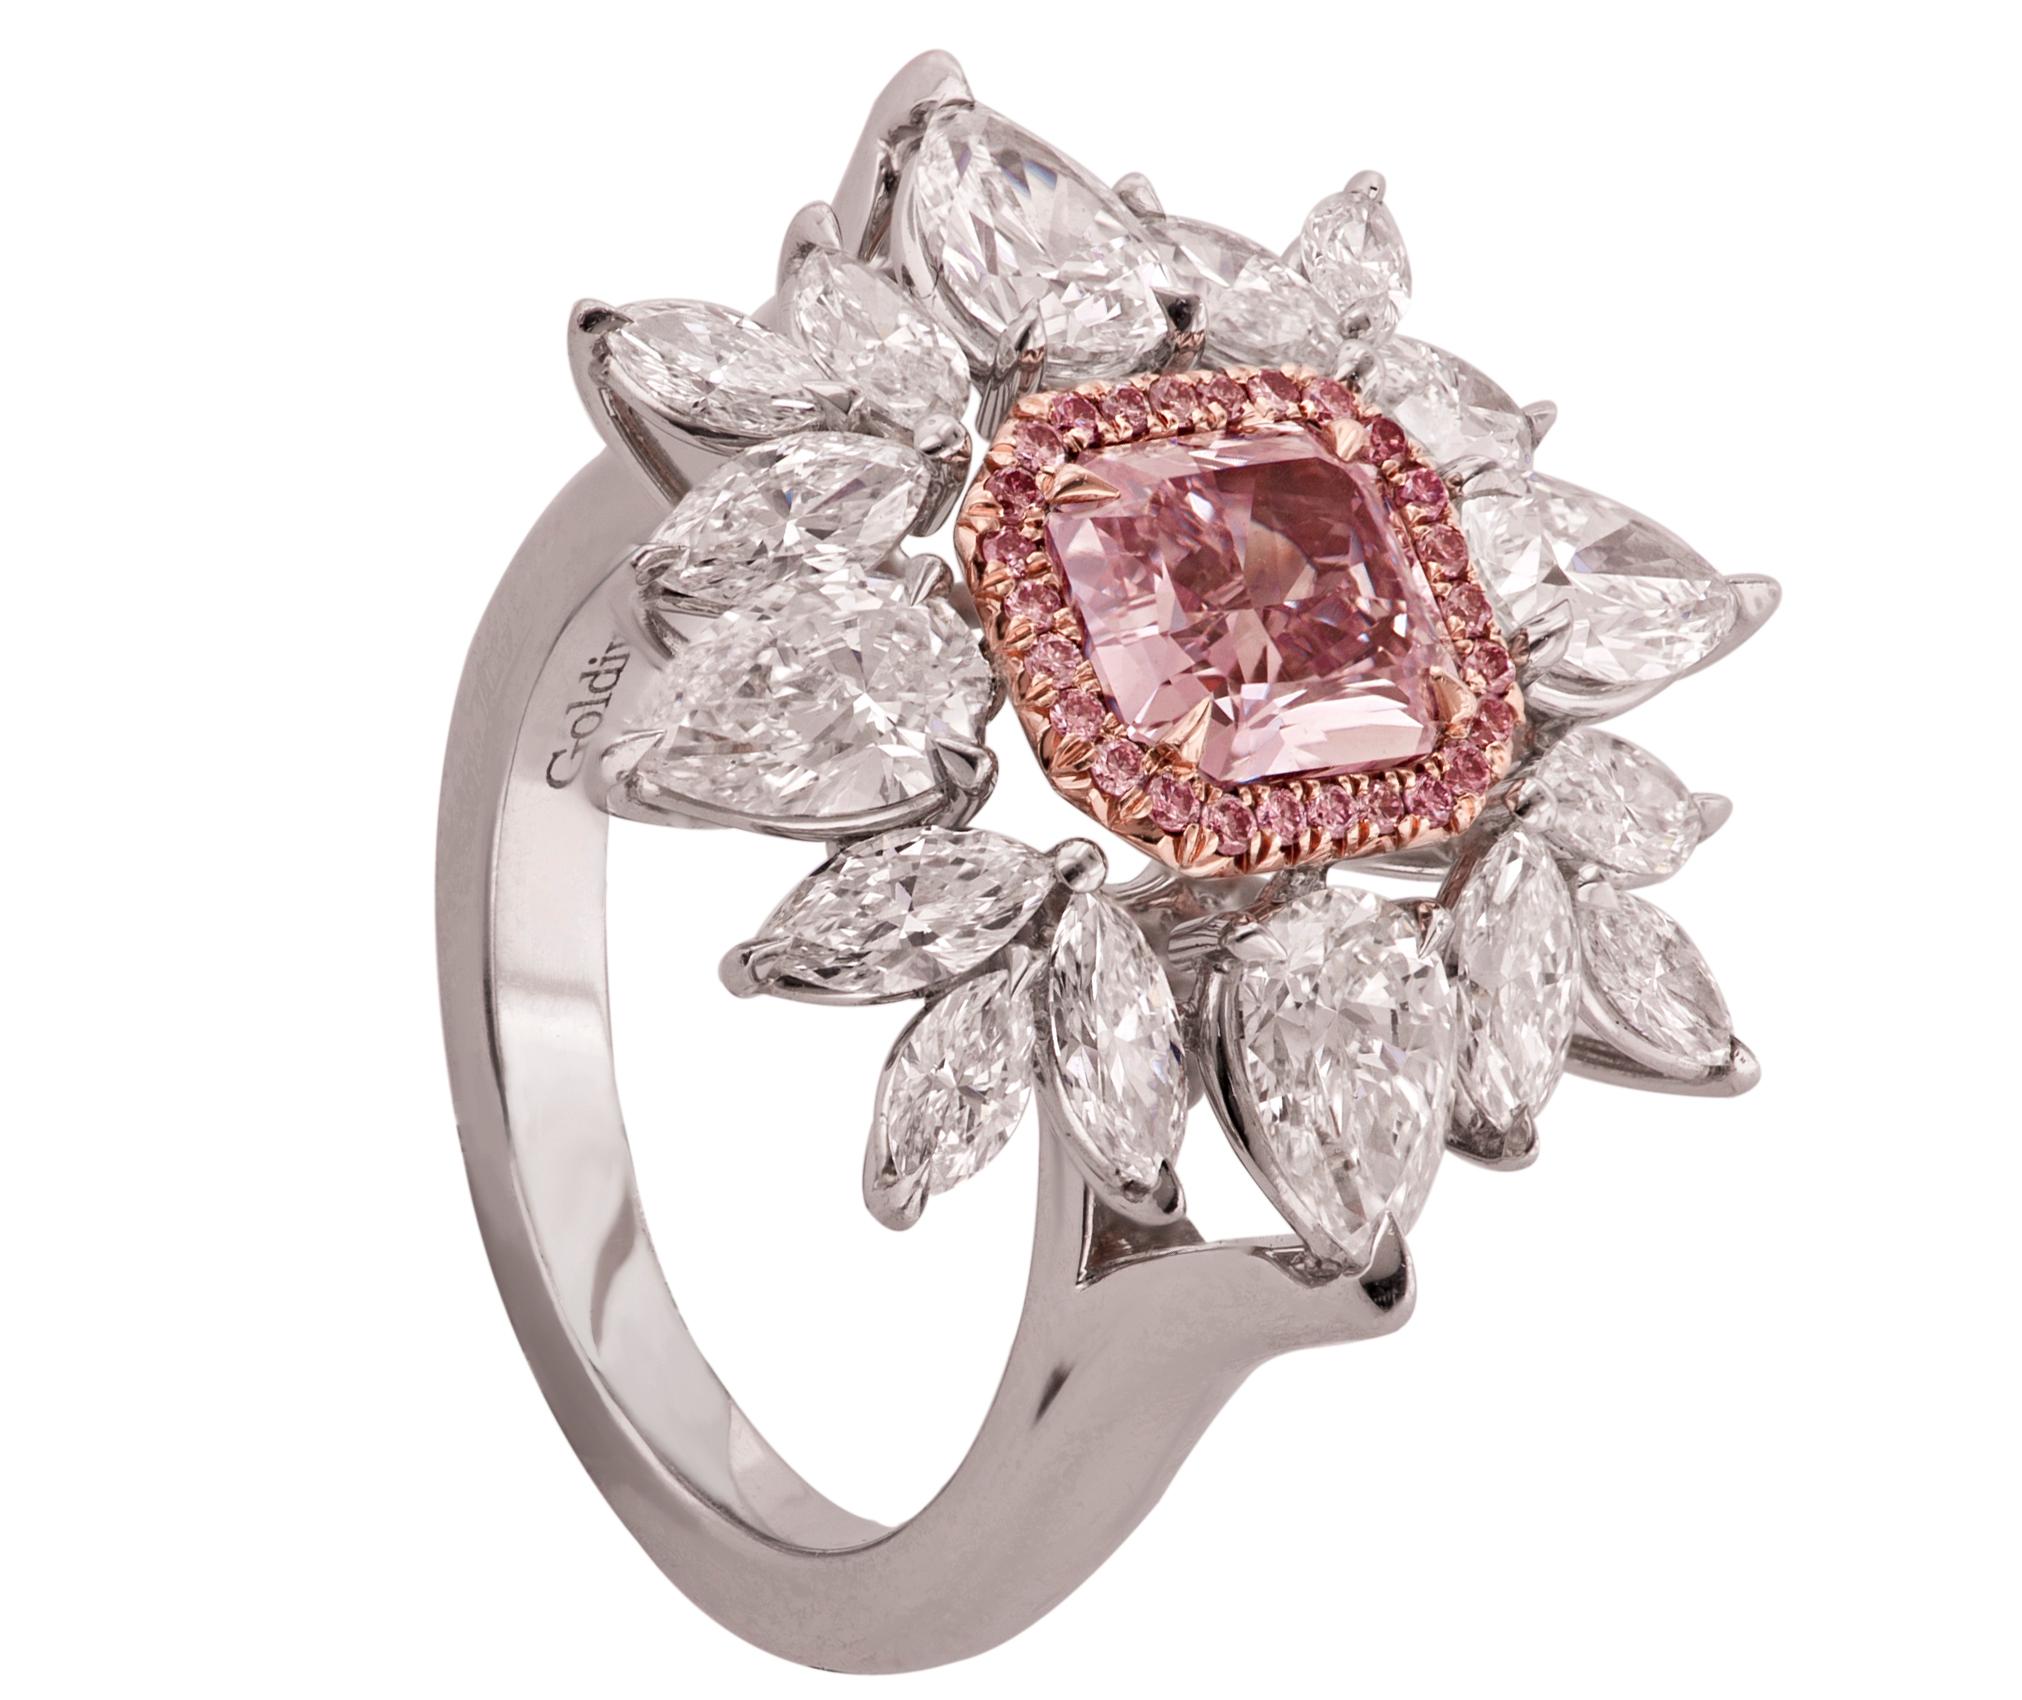 1.28 CT fancy purple pink diamond SI1 clarity in the center surrounded by 3.50 ct of marquise and pear shape stones 
